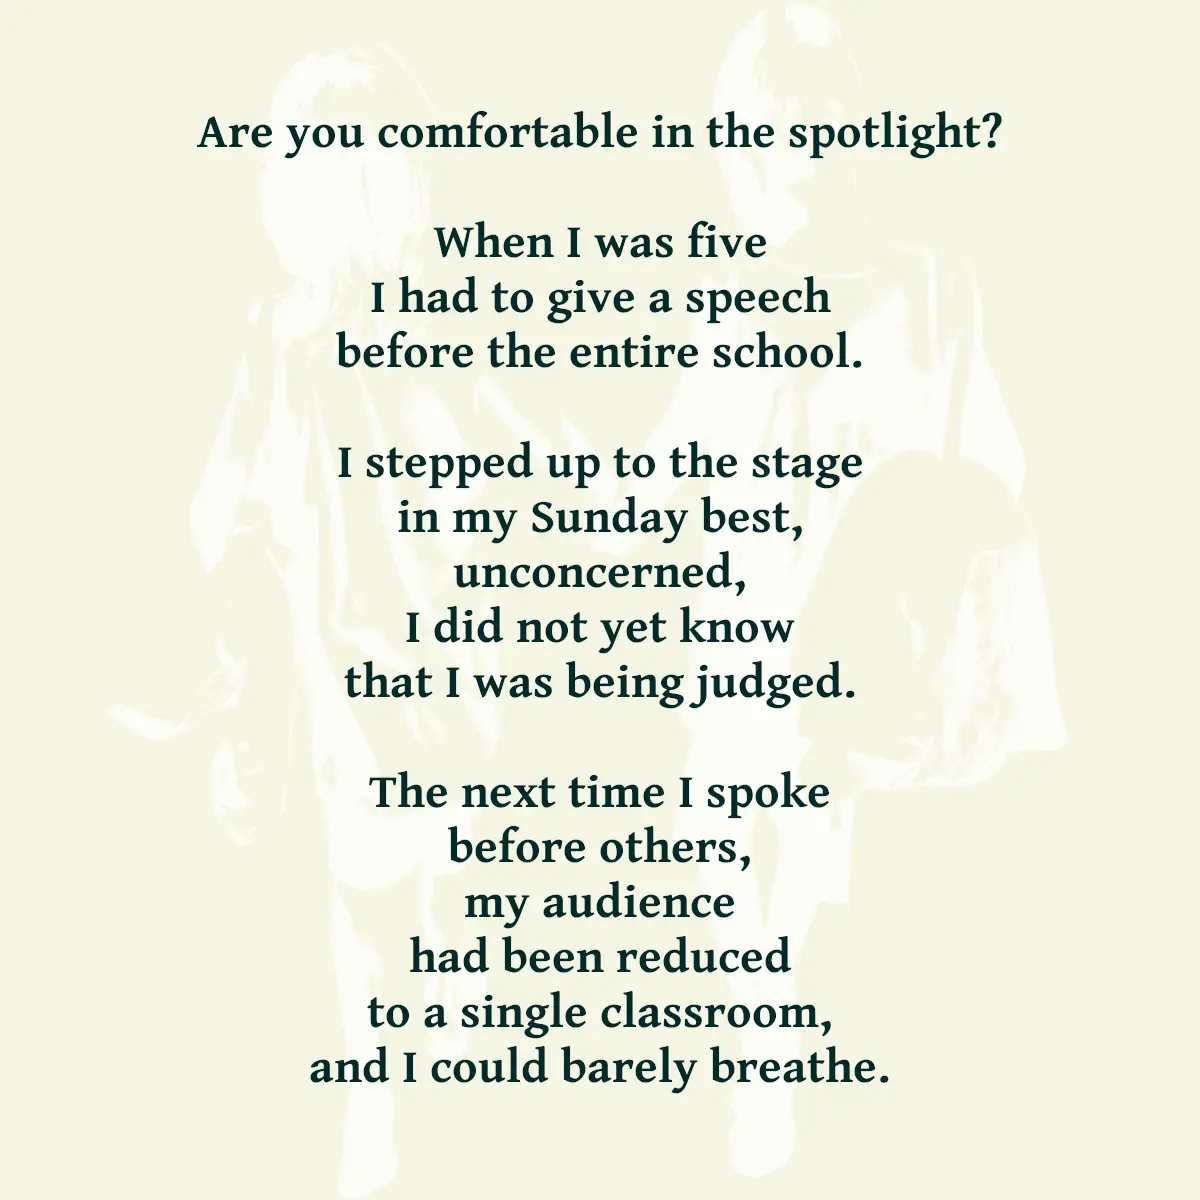 Are you comfortable in the spotlight? When I was five I had to give a speech before the entire school. I stepped up to the stage in my Sunday best, unconcerned, I did not yet know that I was being judged. The next time I spoke before others, my audience had been reduced to a single classroom, and I could barely breathe.